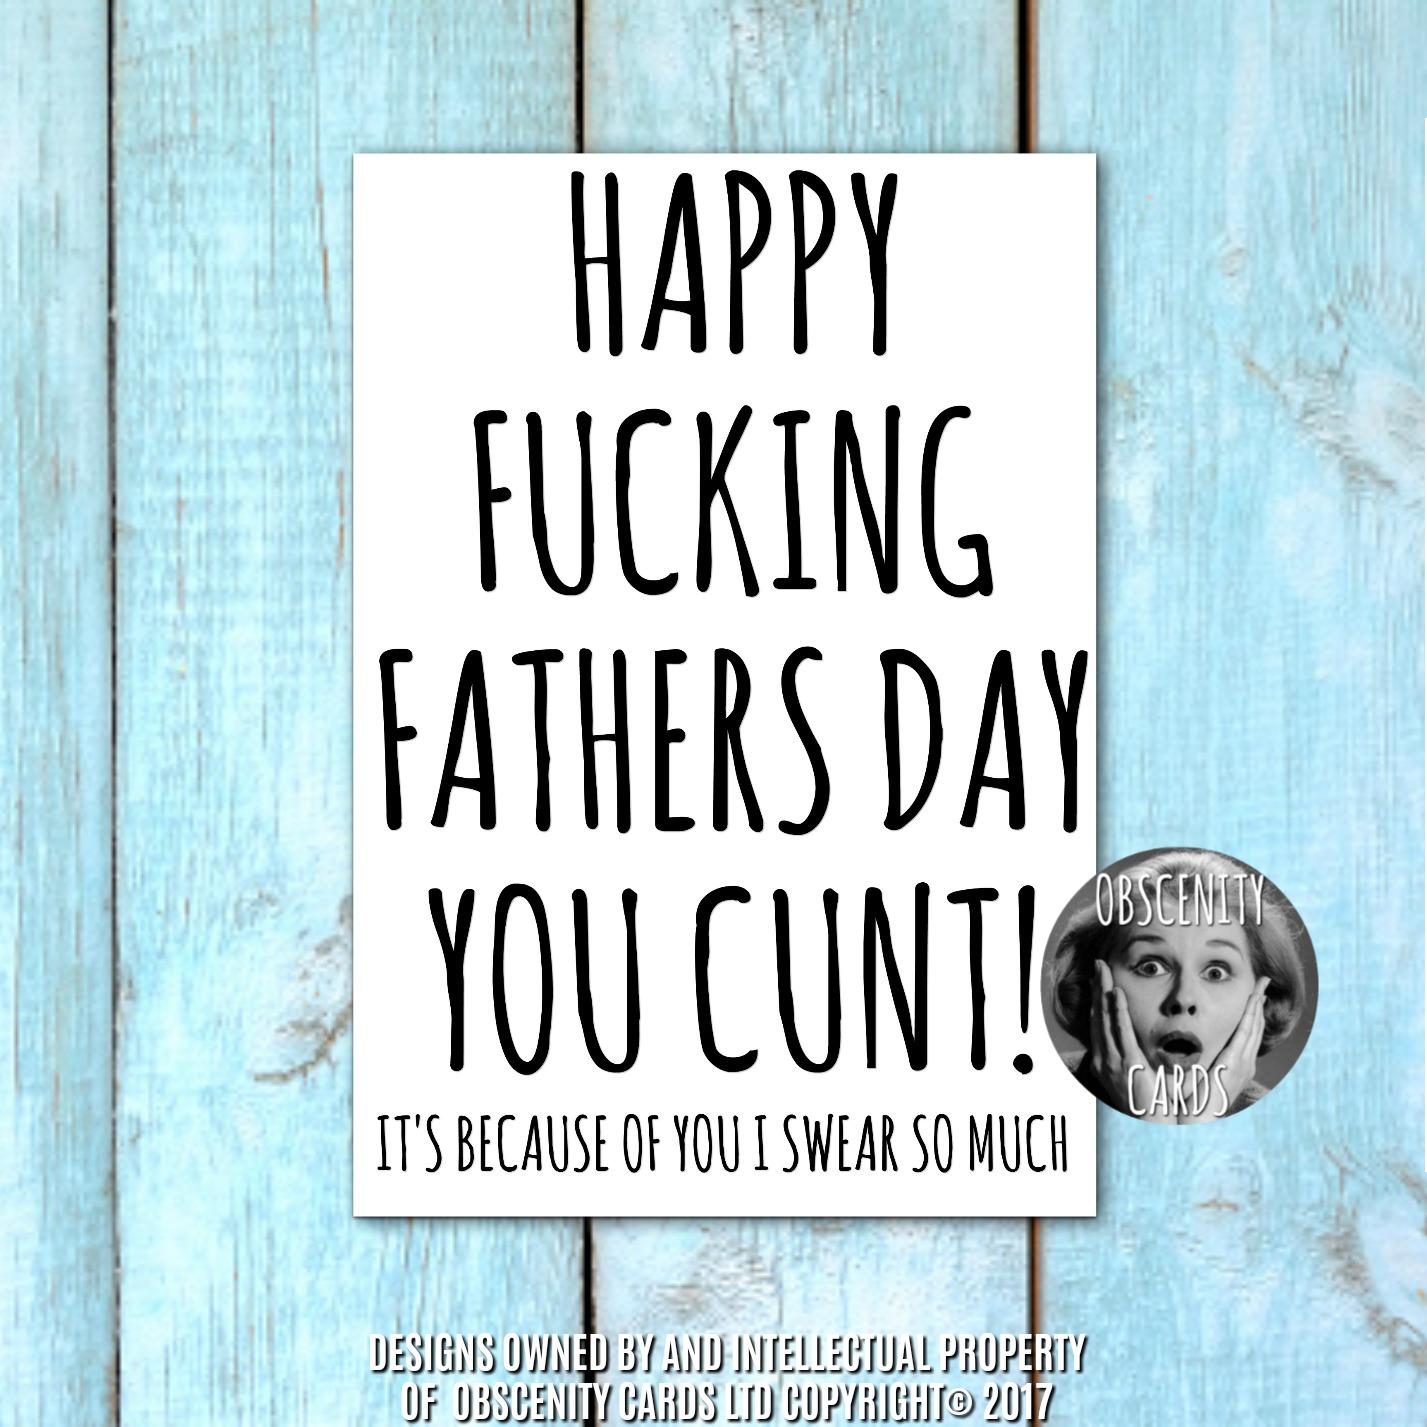 FUNNY FATHERS DAY CARDS. Obscene funny offensive birthday cards by Obscenity cards. Obscene Funny Cards, Pens, Party Hats, Key rings, Magnets, Lighters & Loads More!